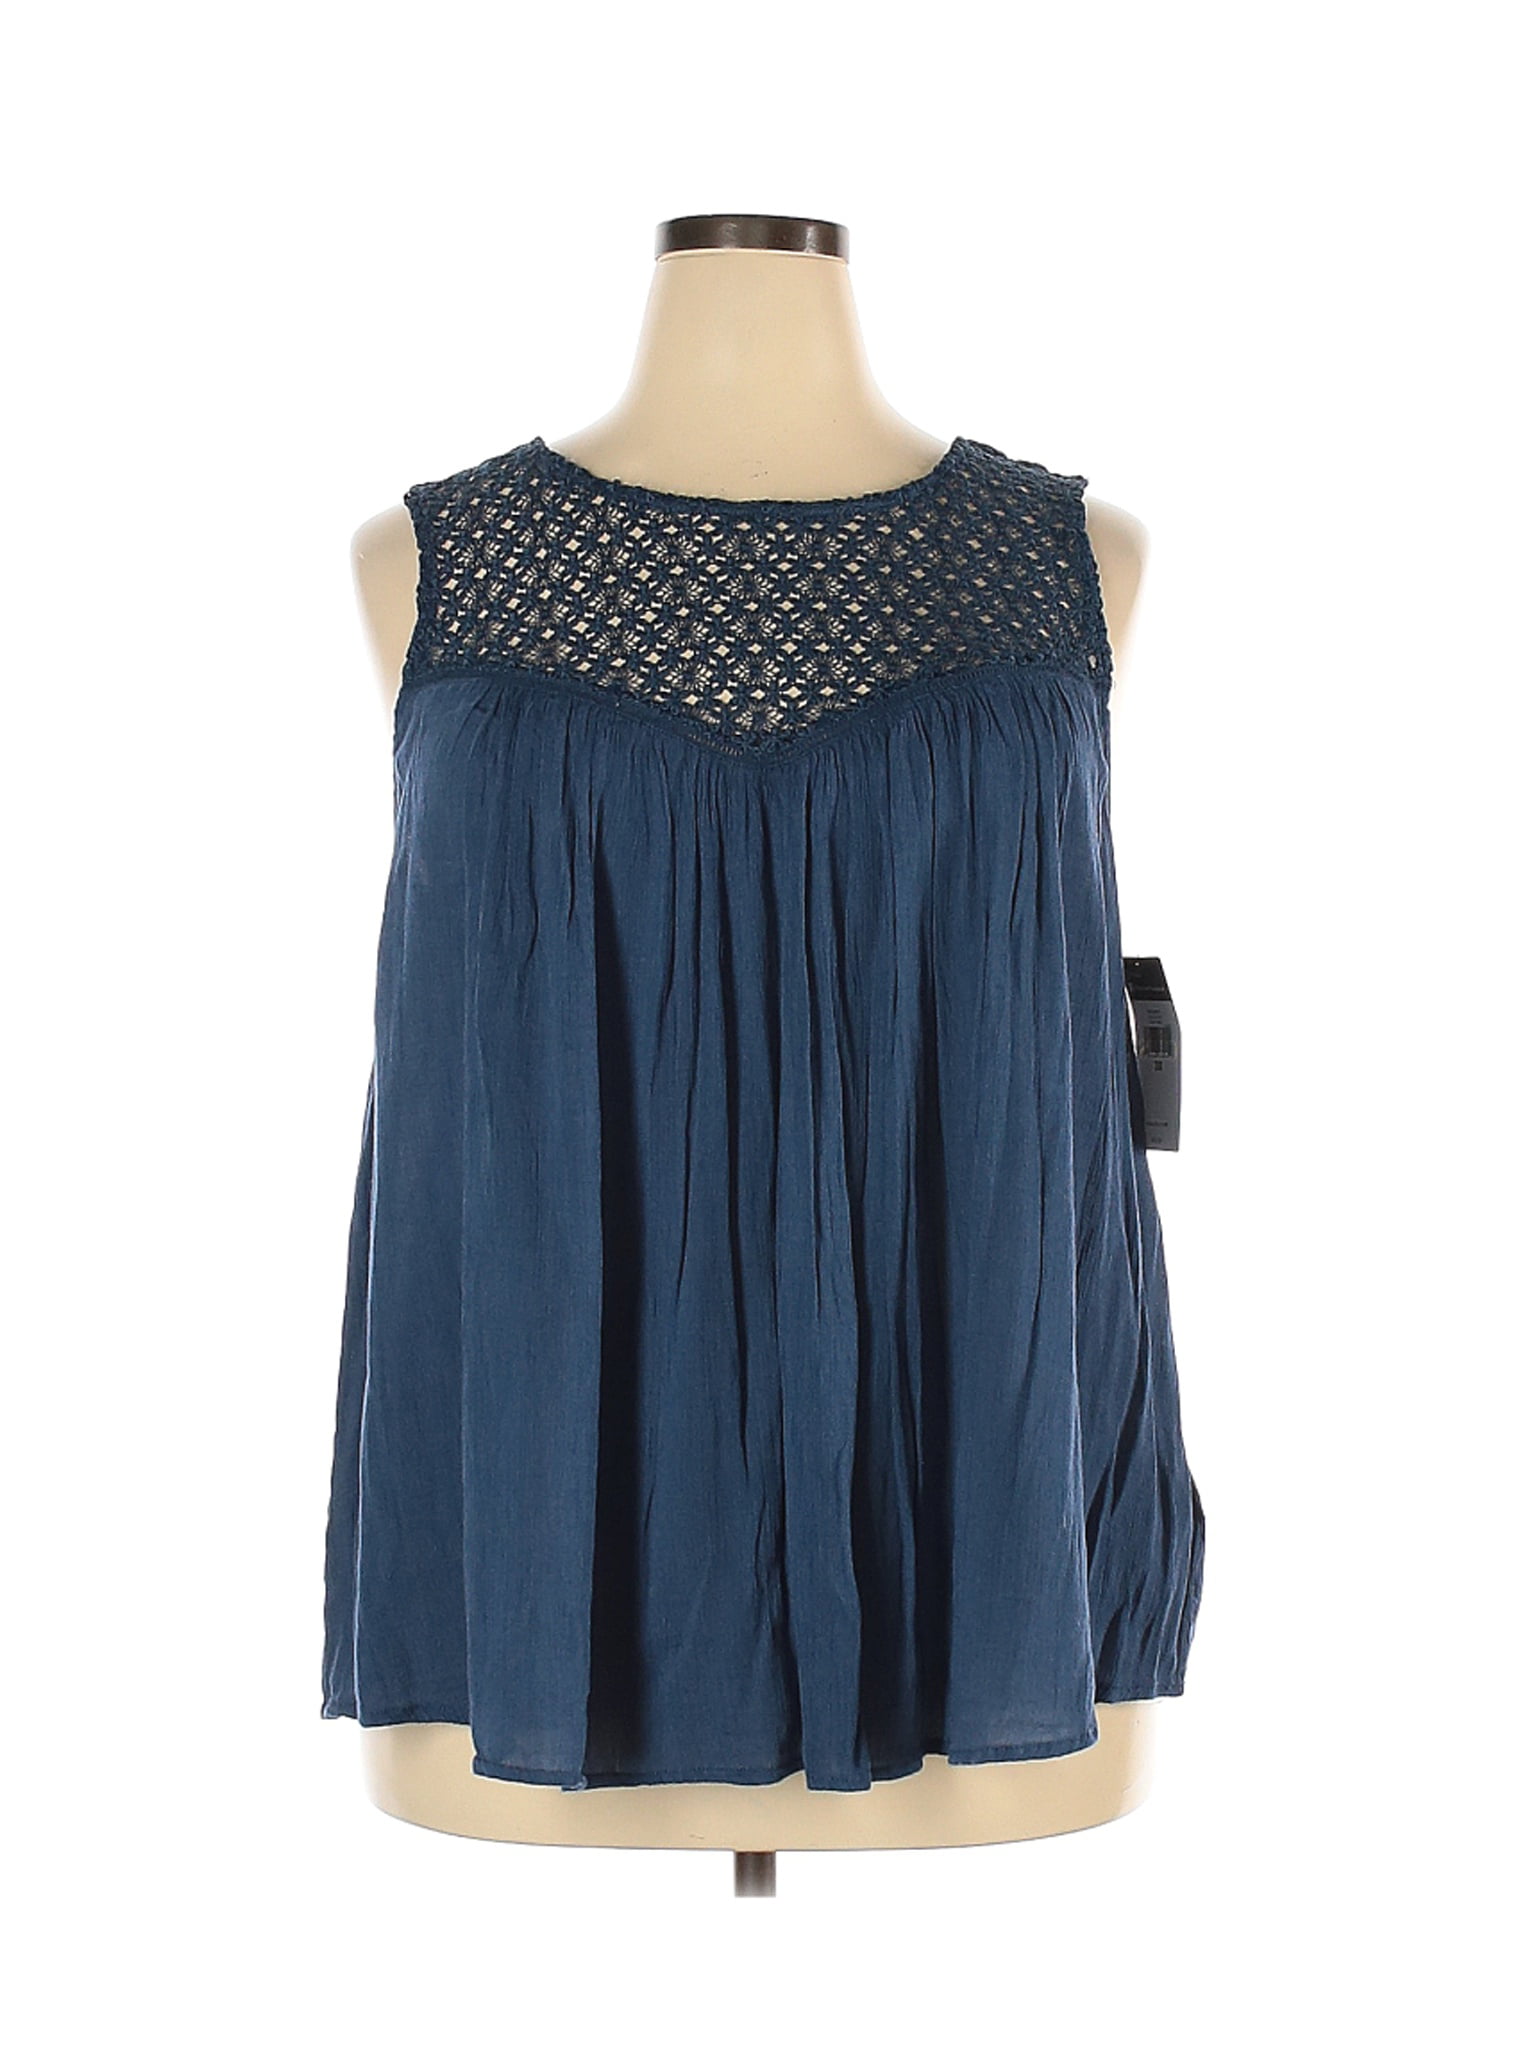 Chaps - Pre-Owned Chaps Women's Size 3X Plus Sleeveless Blouse ...